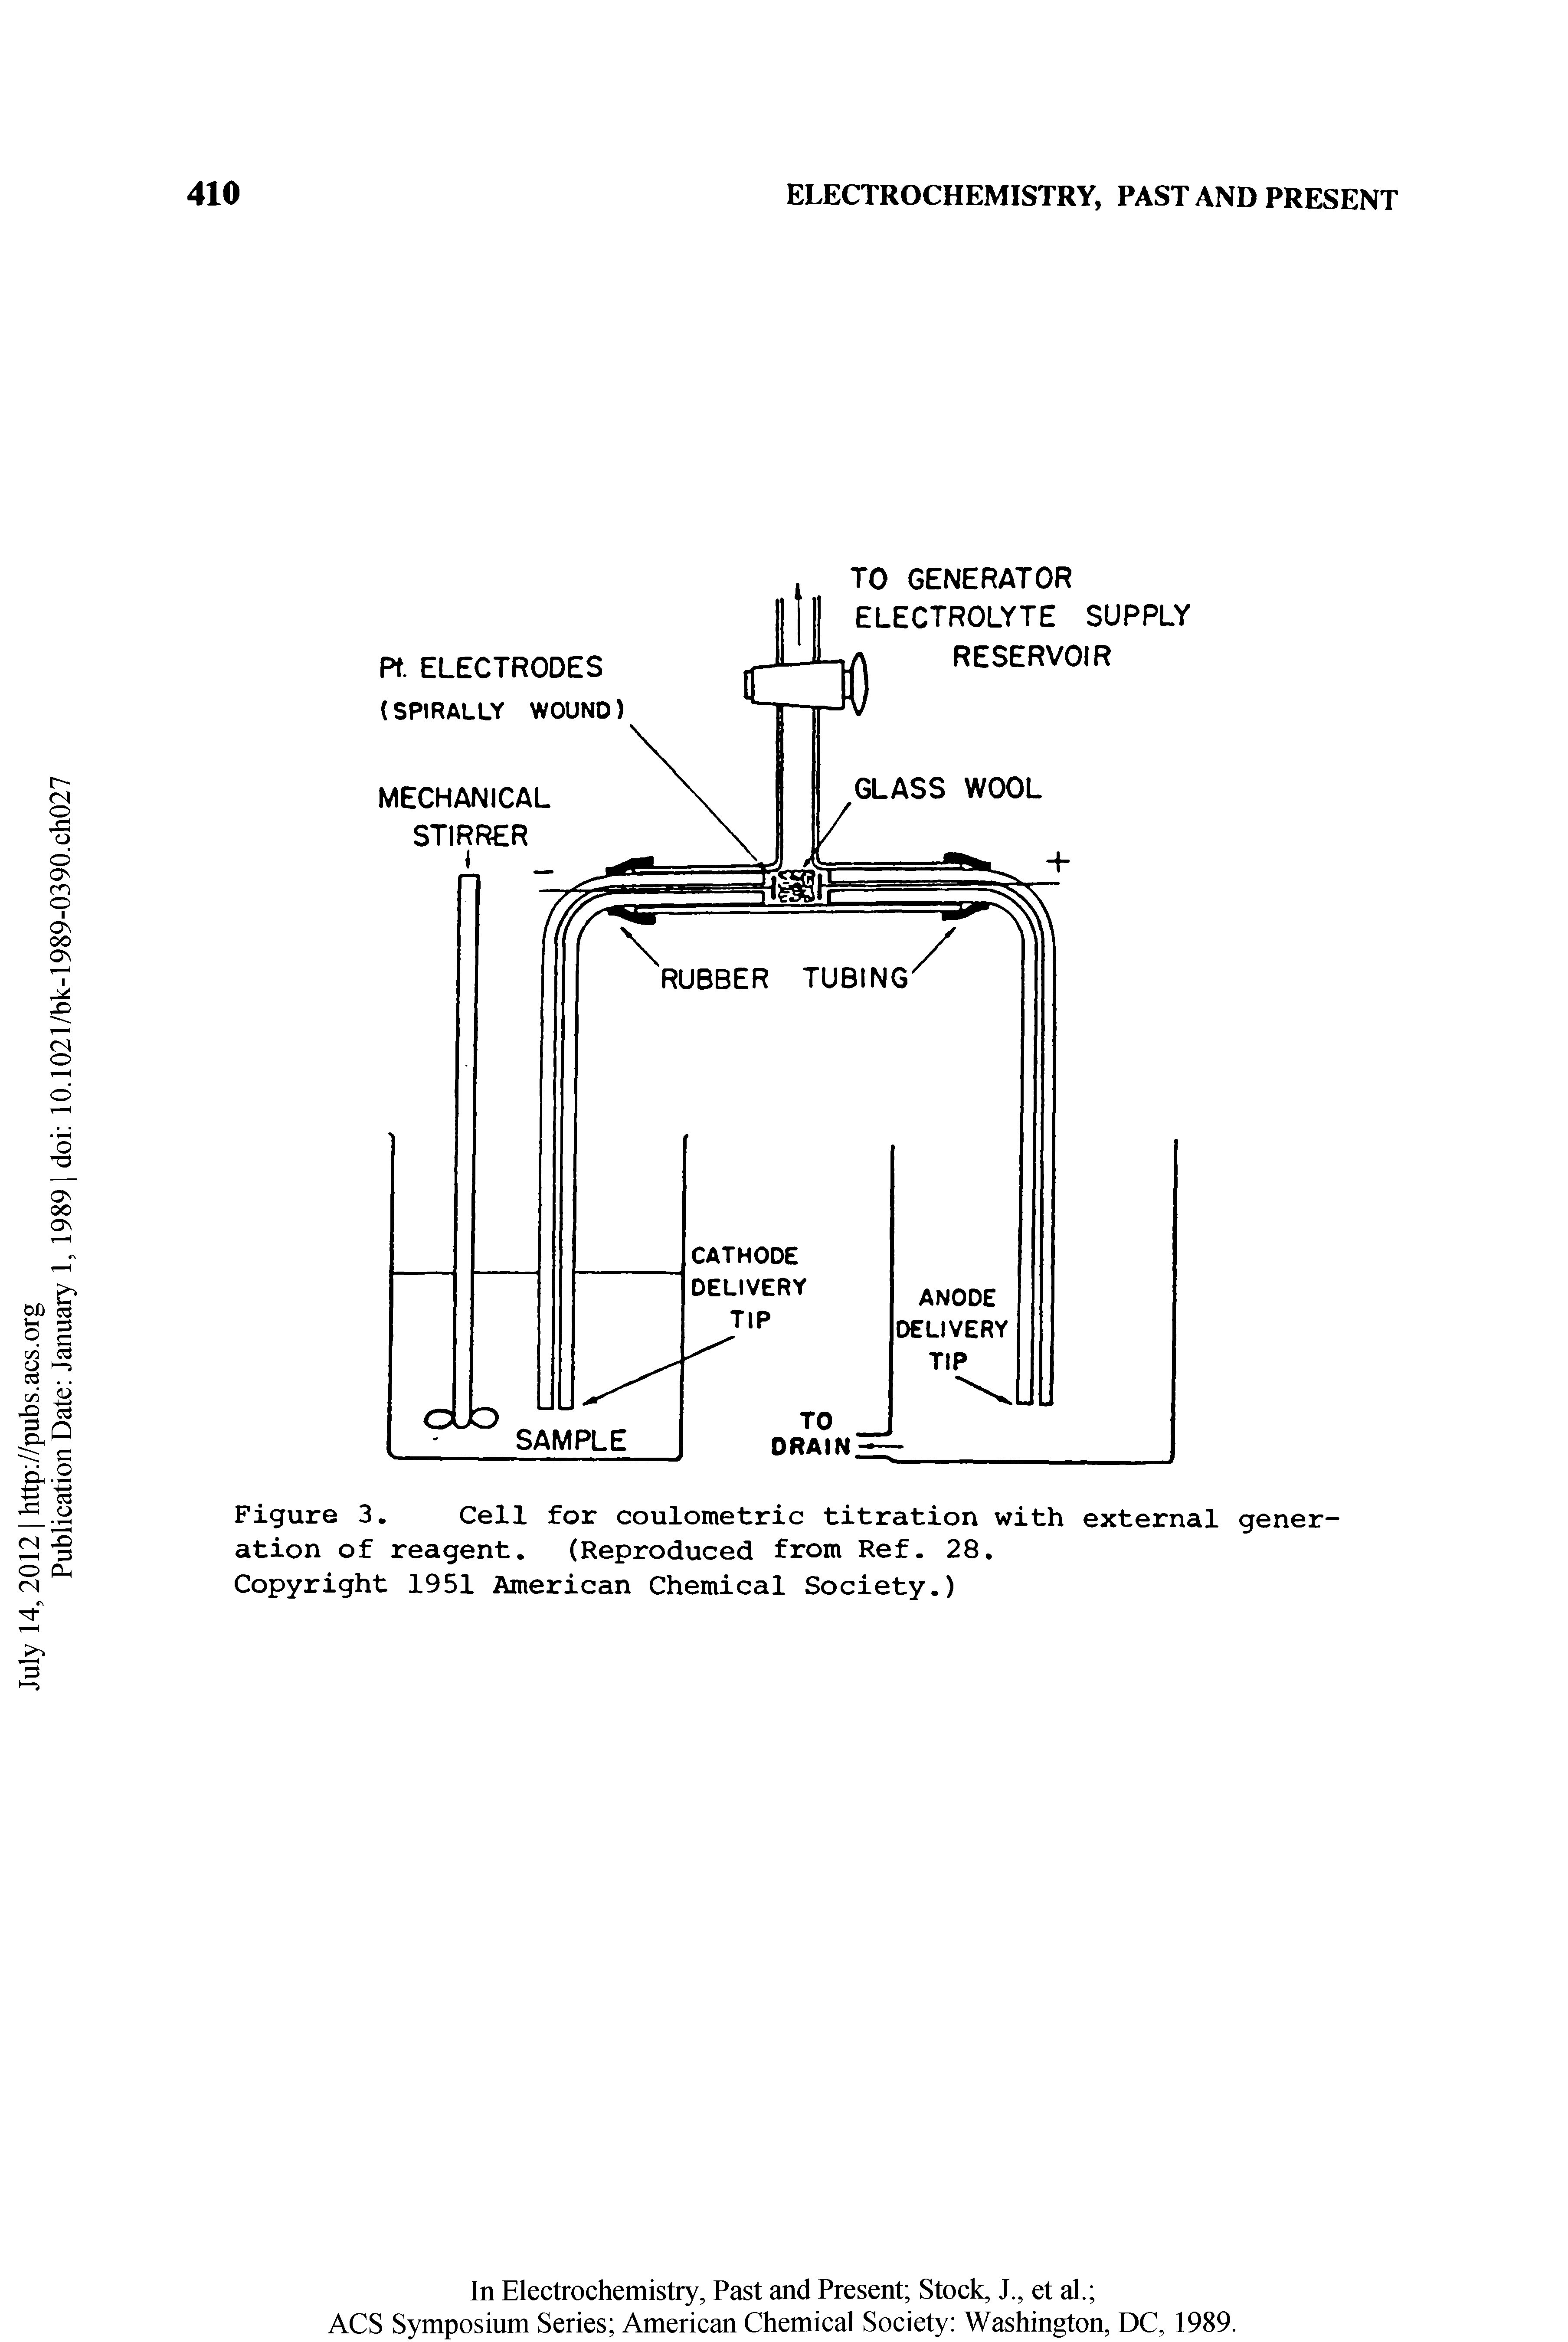 Figure 3. Cell for coulometric titration with external generation of reagent. (Reproduced from Ref. 28.